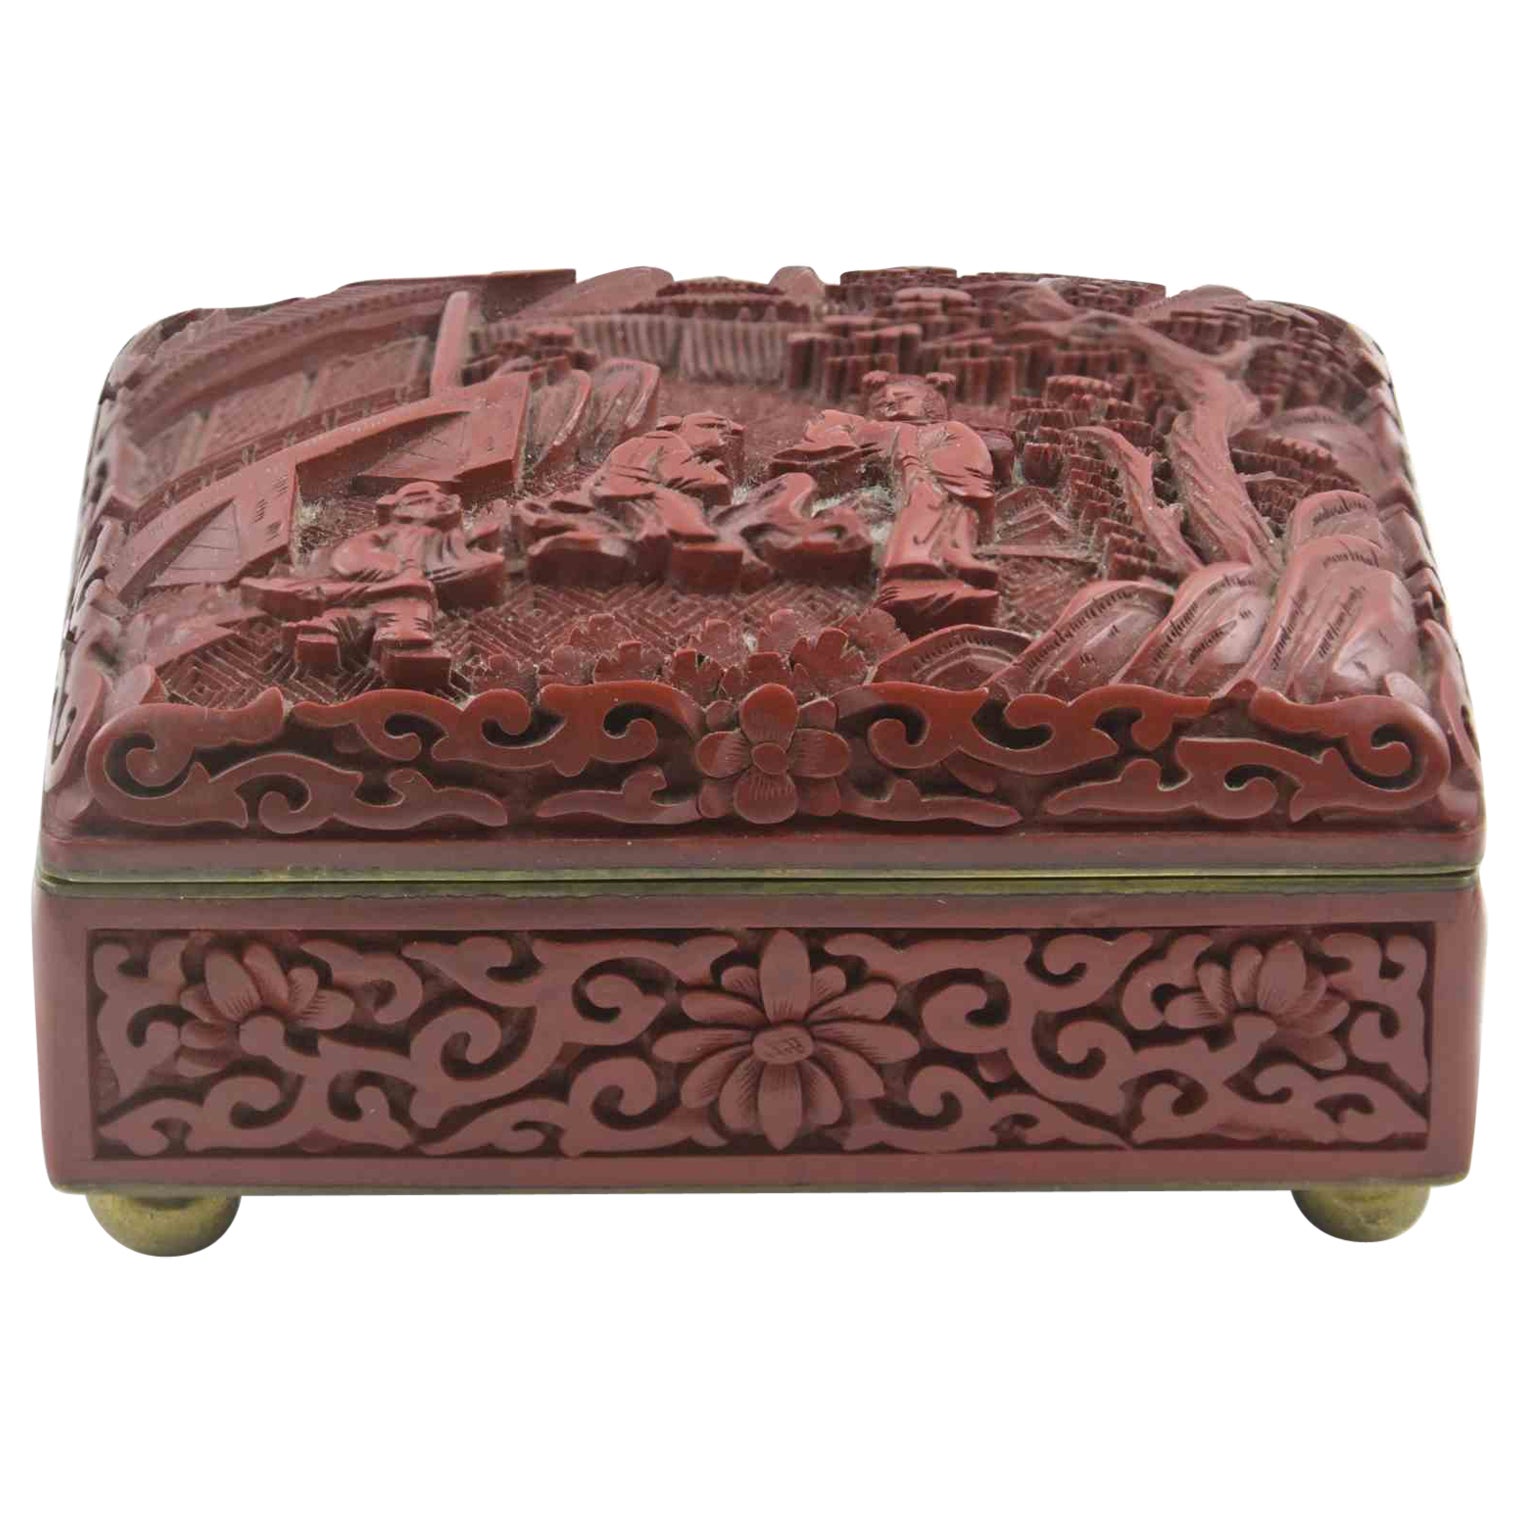 Vintage Chinese Box in Sealing Wax, China, Mid-20th Century For Sale